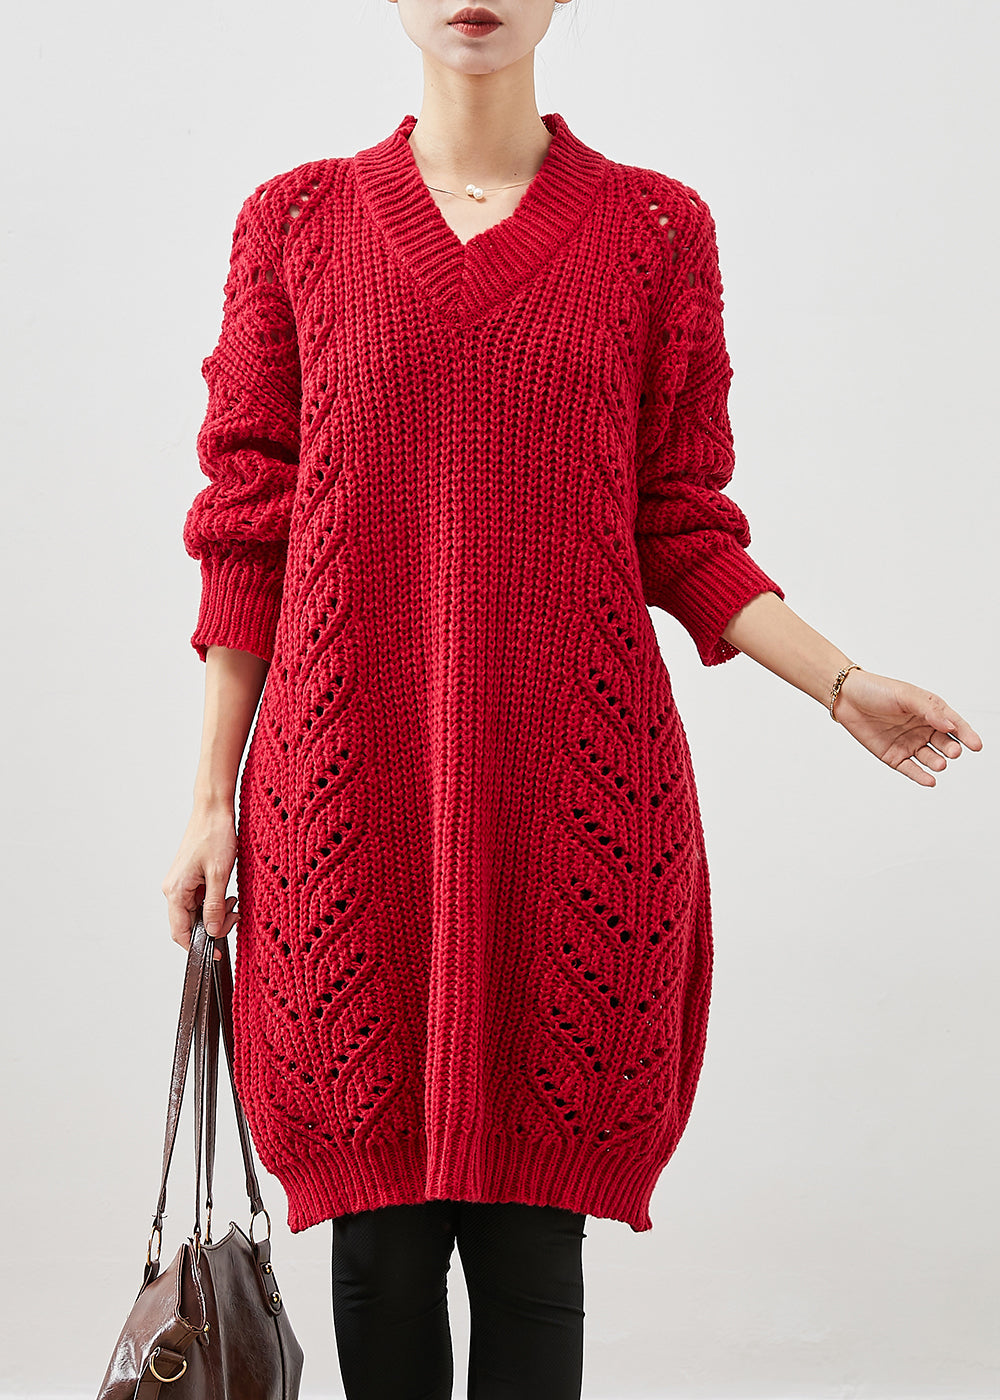 Style Red Oversized Hollow Out Knit Sweater Dress Winter